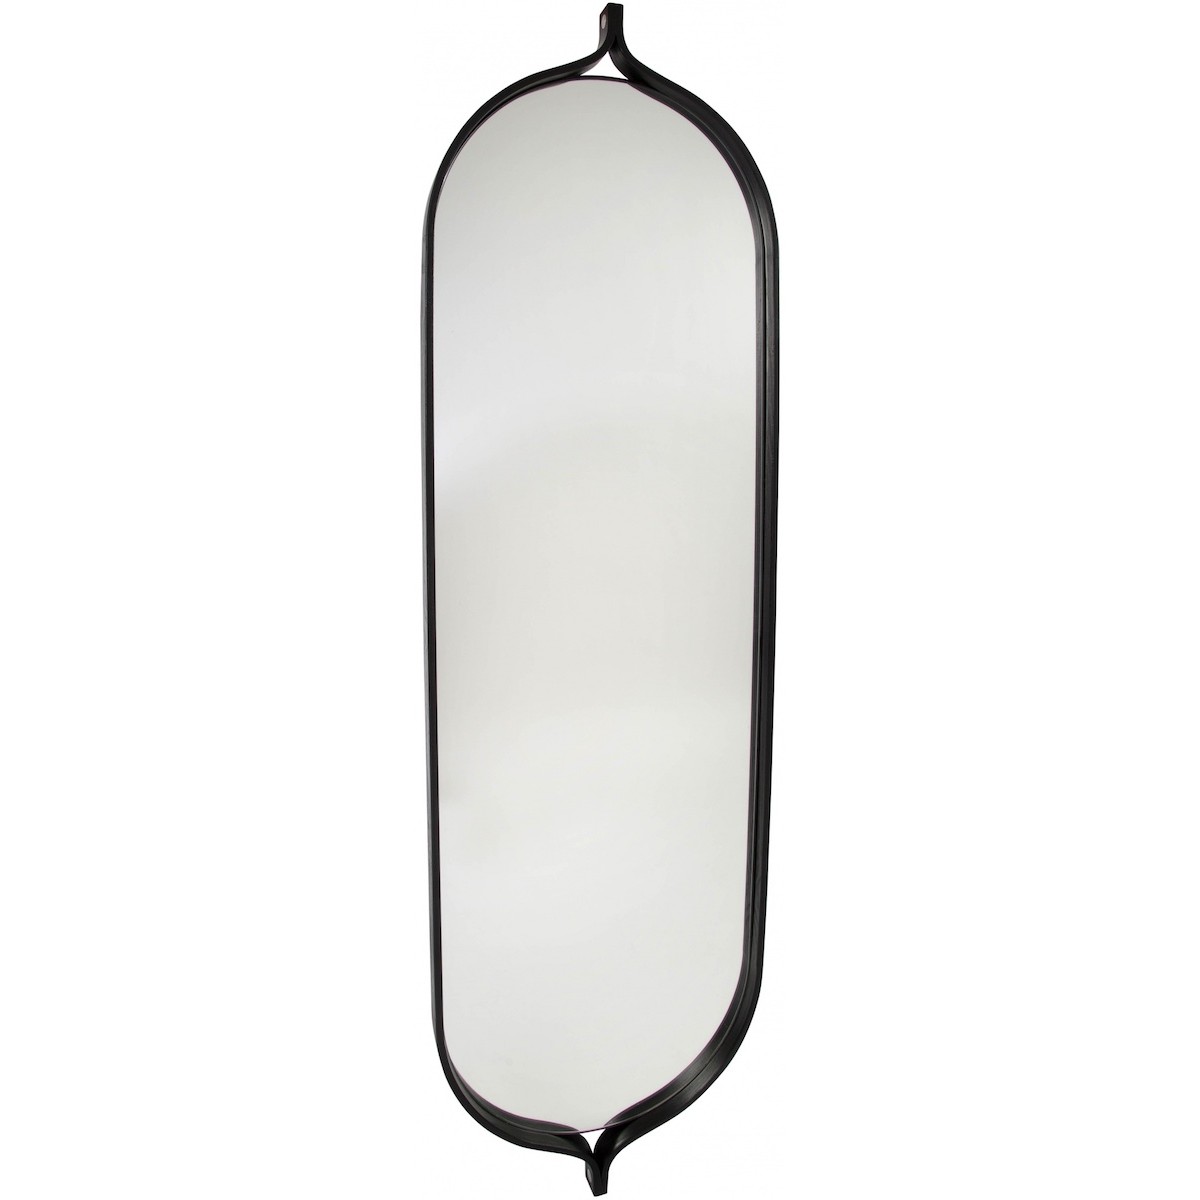 Comma mirror - black stained ash - oval 135 x 40 cm